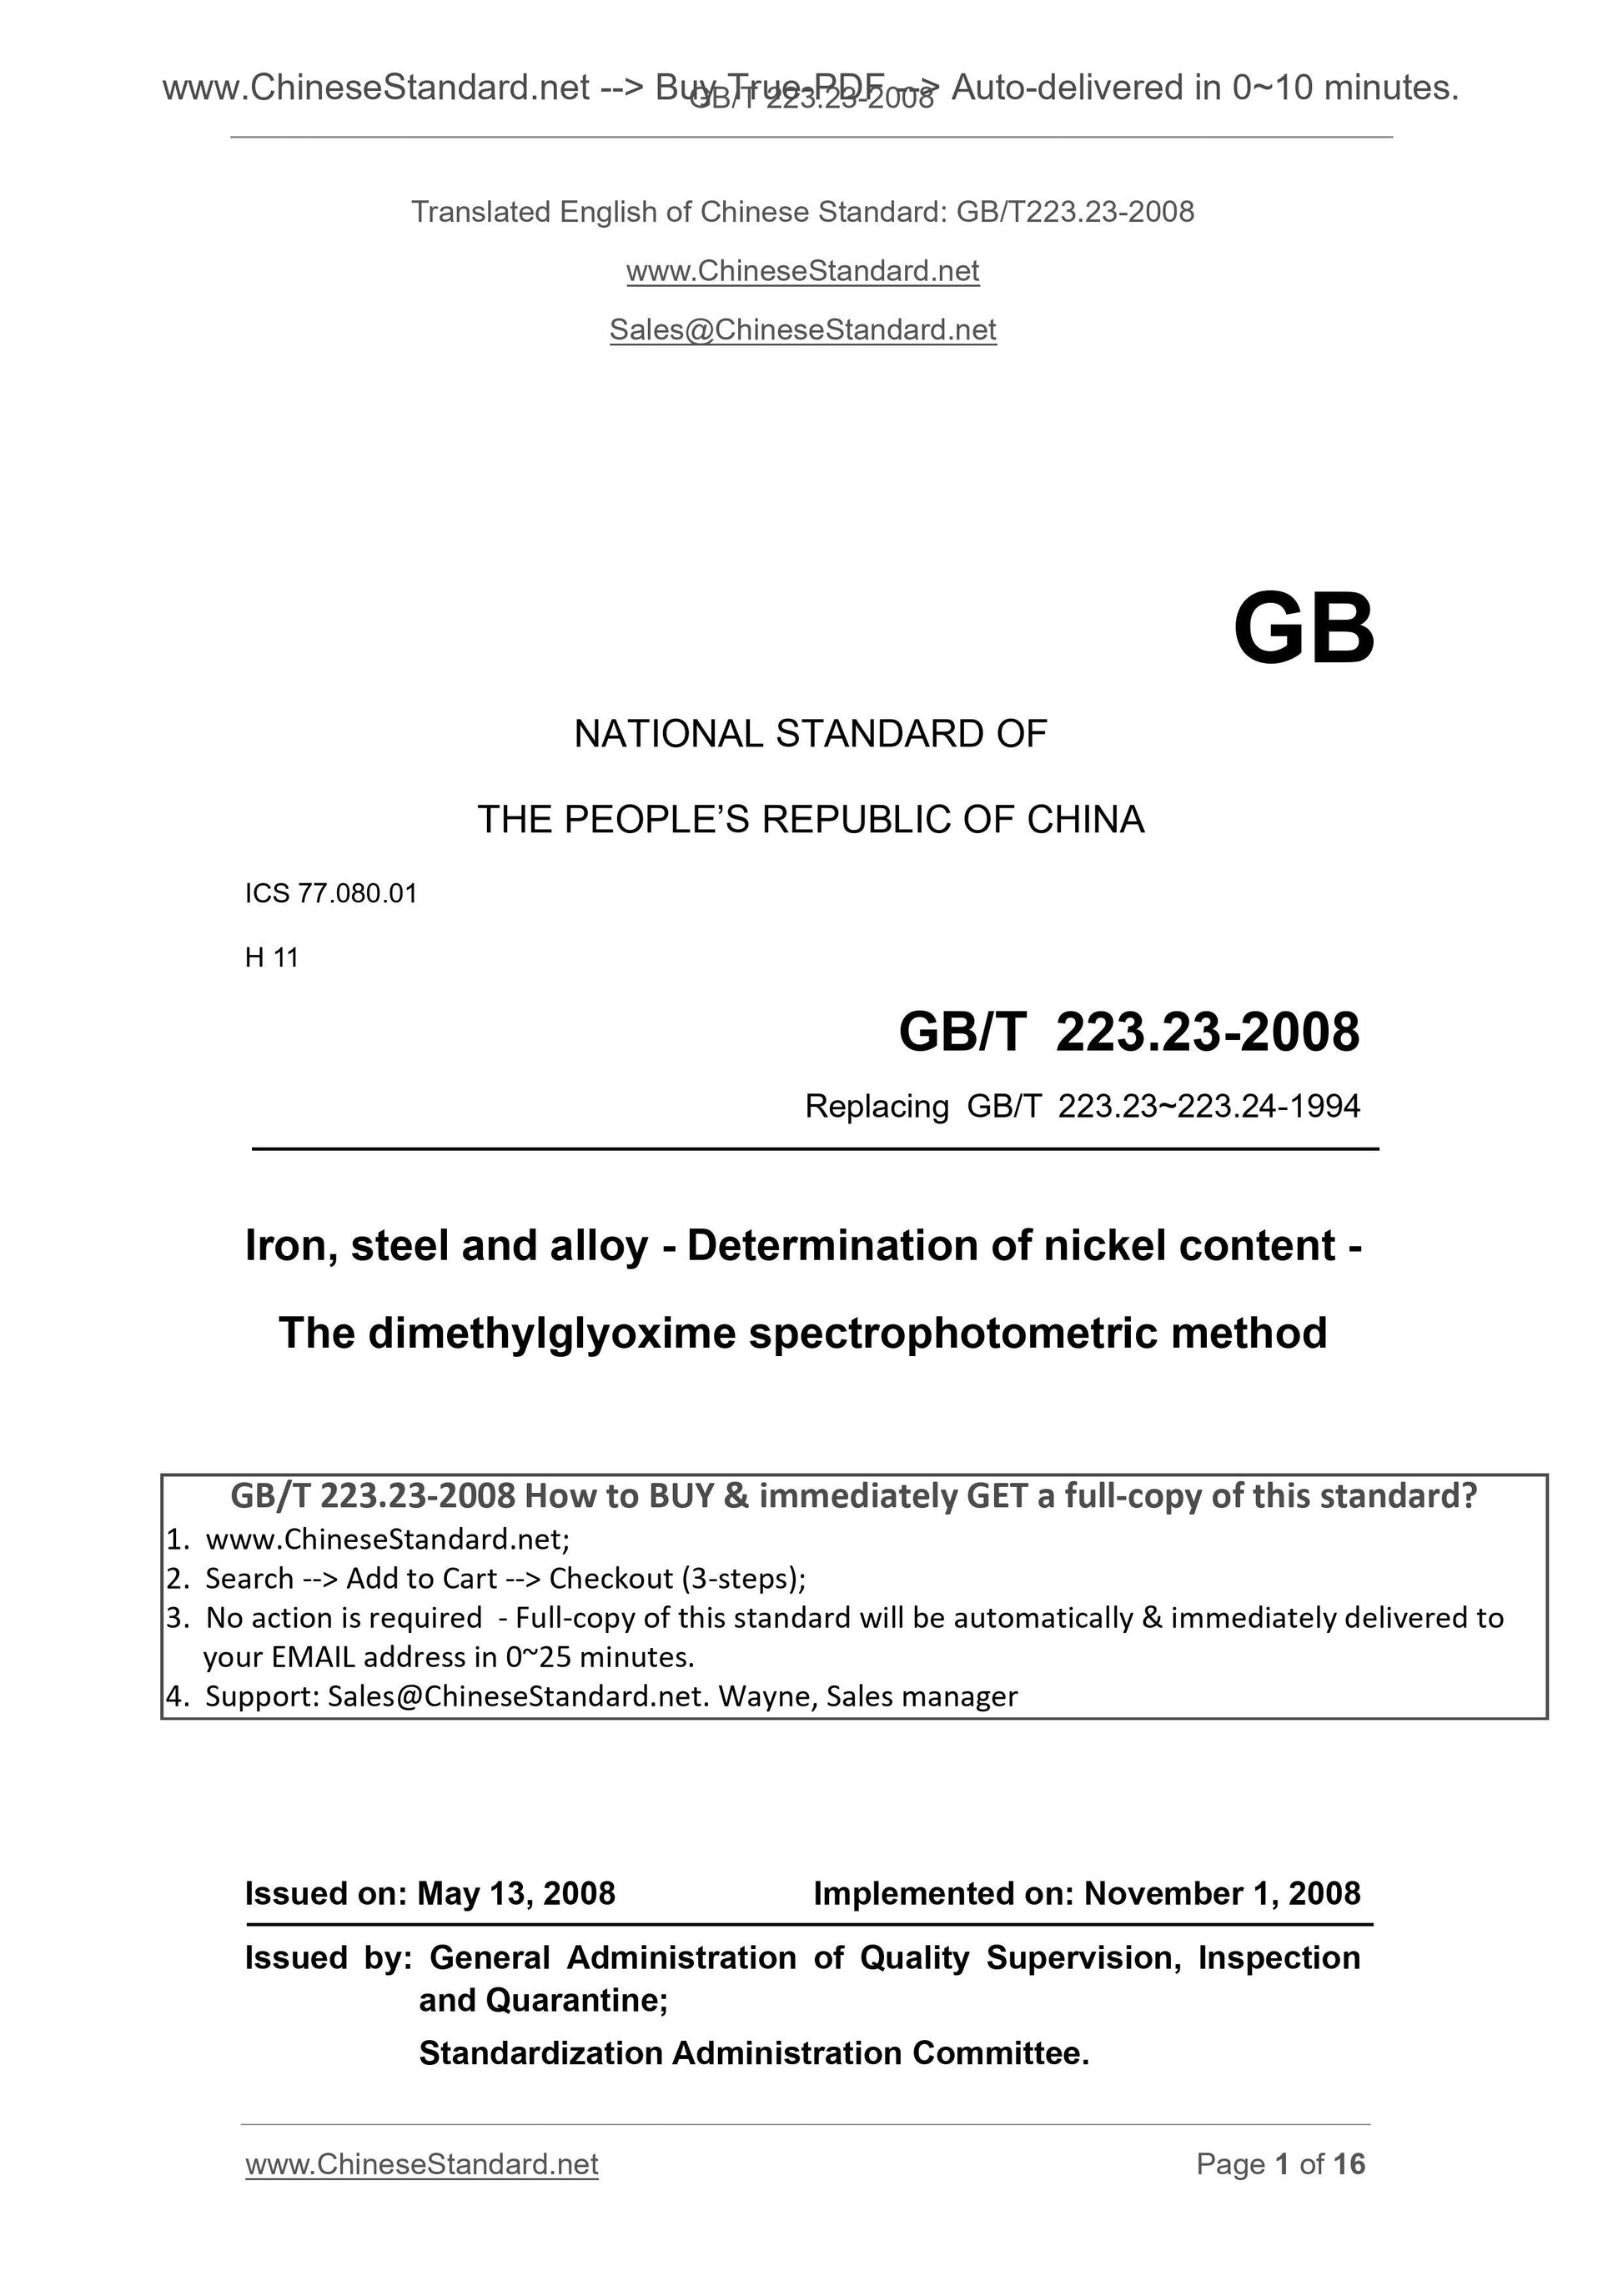 GB/T 223.23-2008 Page 1